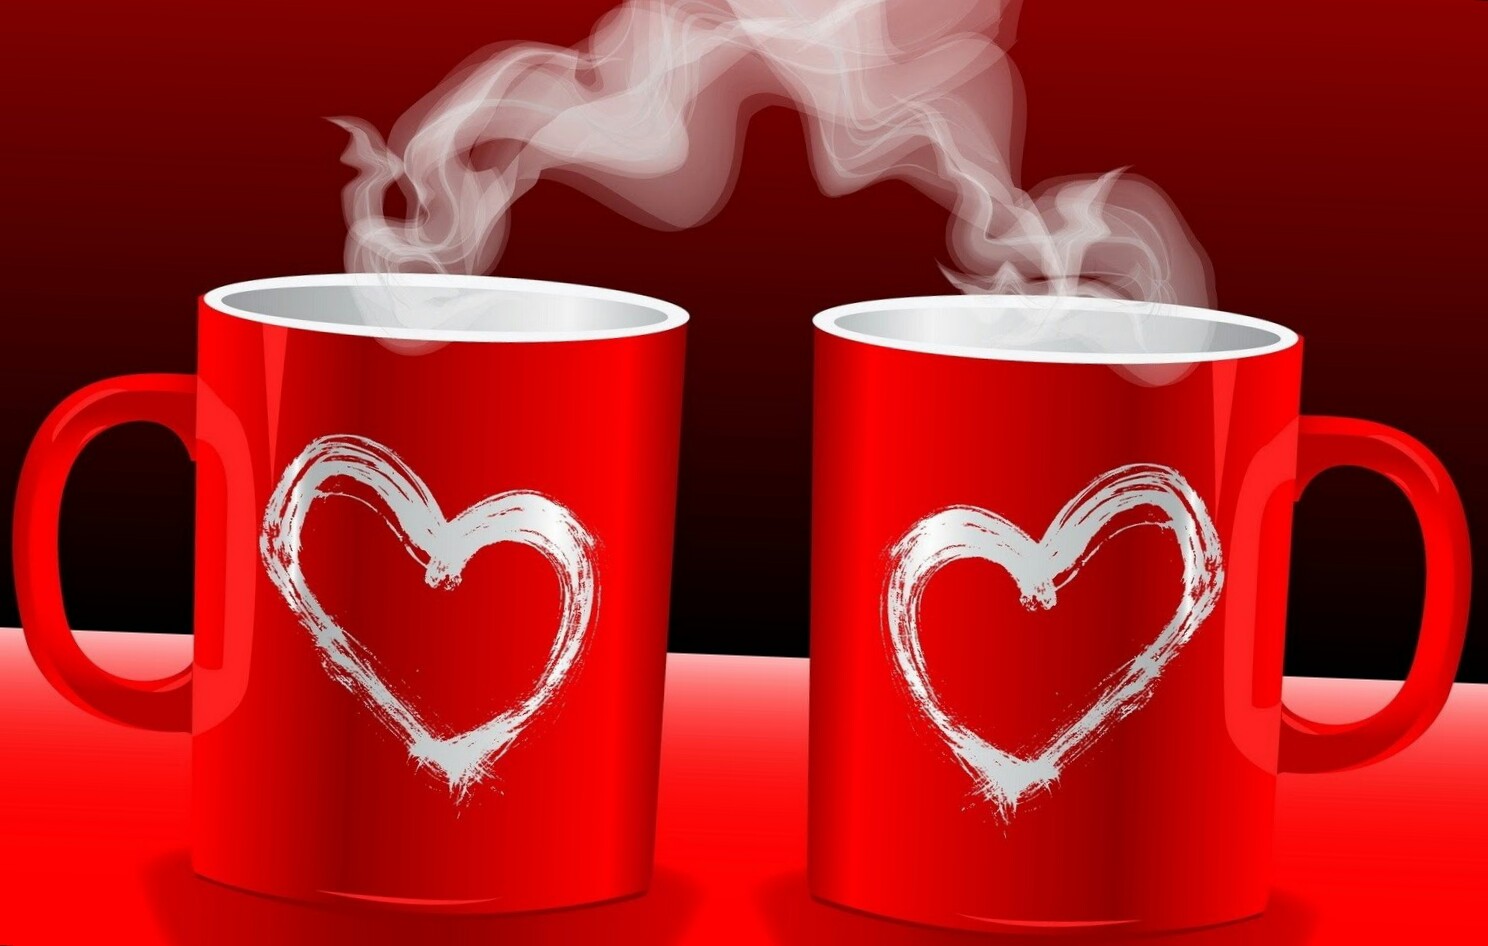 some good wallpapers,mug,heart,red,love,cup